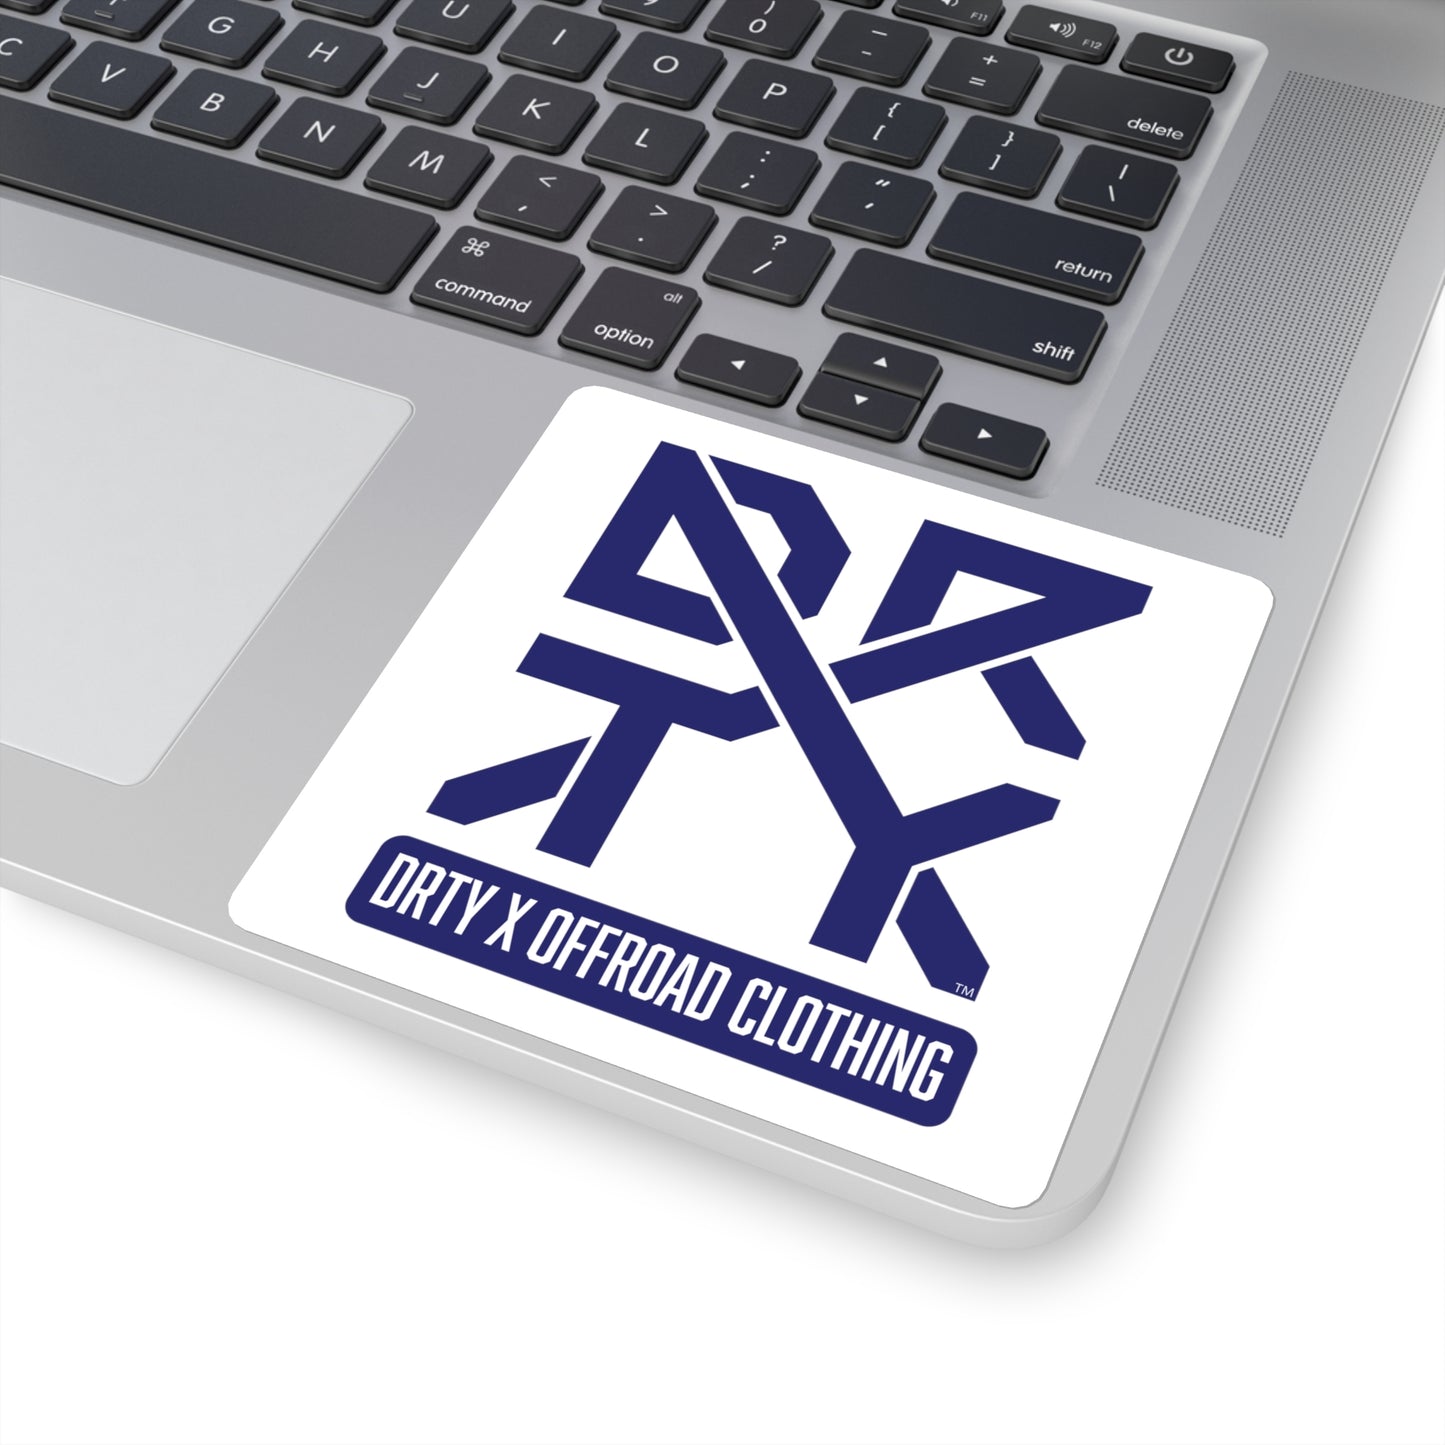 This image shows a small square DRTY X Logo sticker on a laptop background.